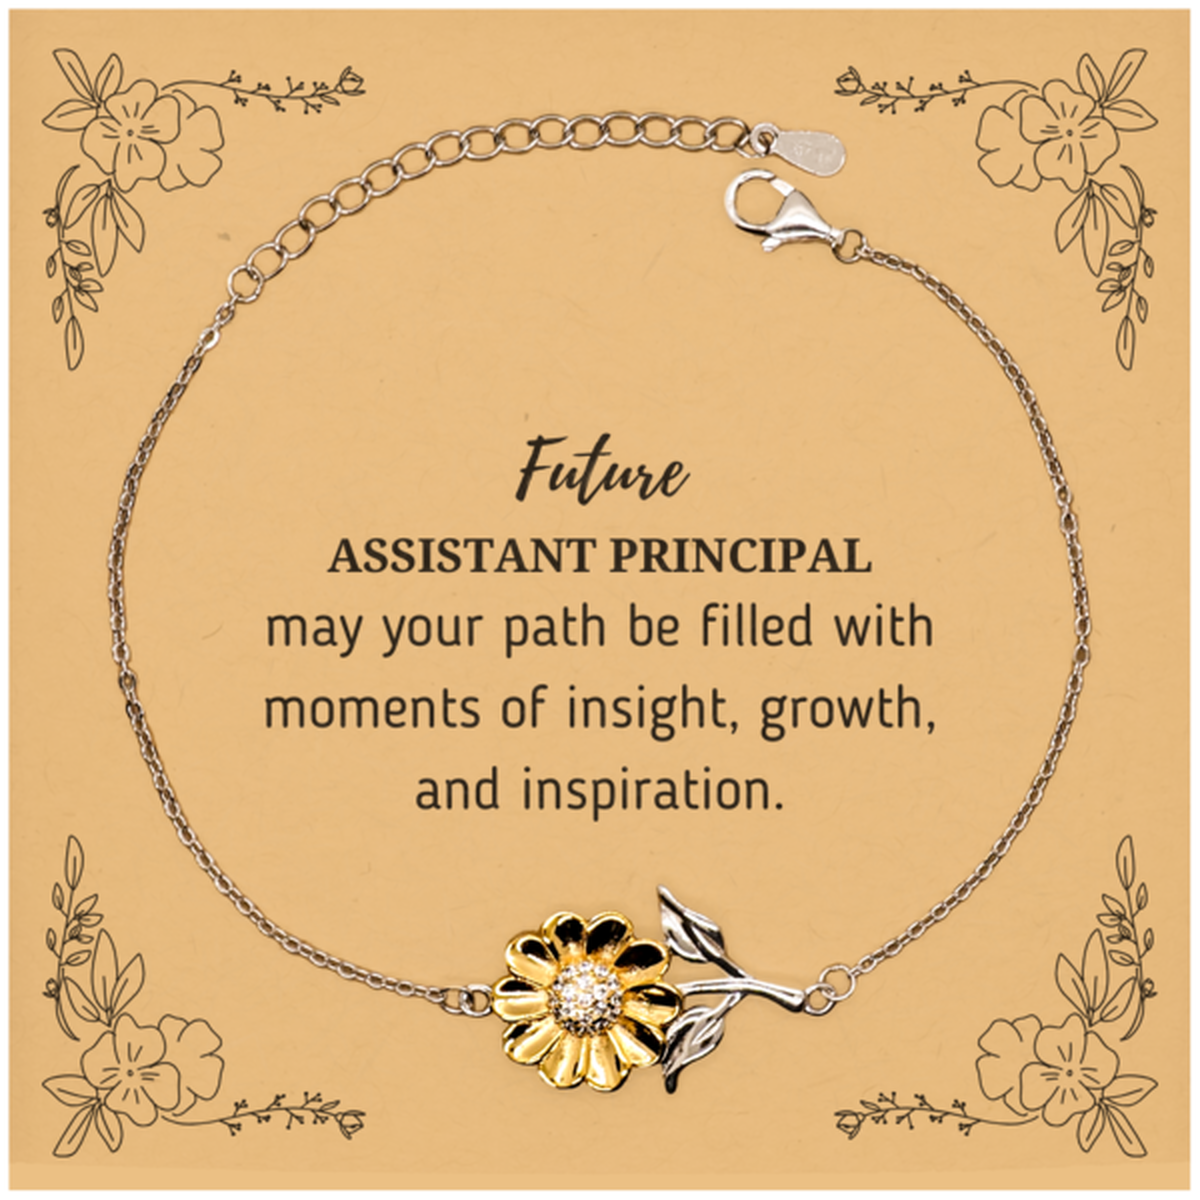 Future Assistant Principal Gifts, May your path be filled with moments of insight, Graduation Gifts for New Assistant Principal, Christmas Unique Sunflower Bracelet For Men, Women, Friends